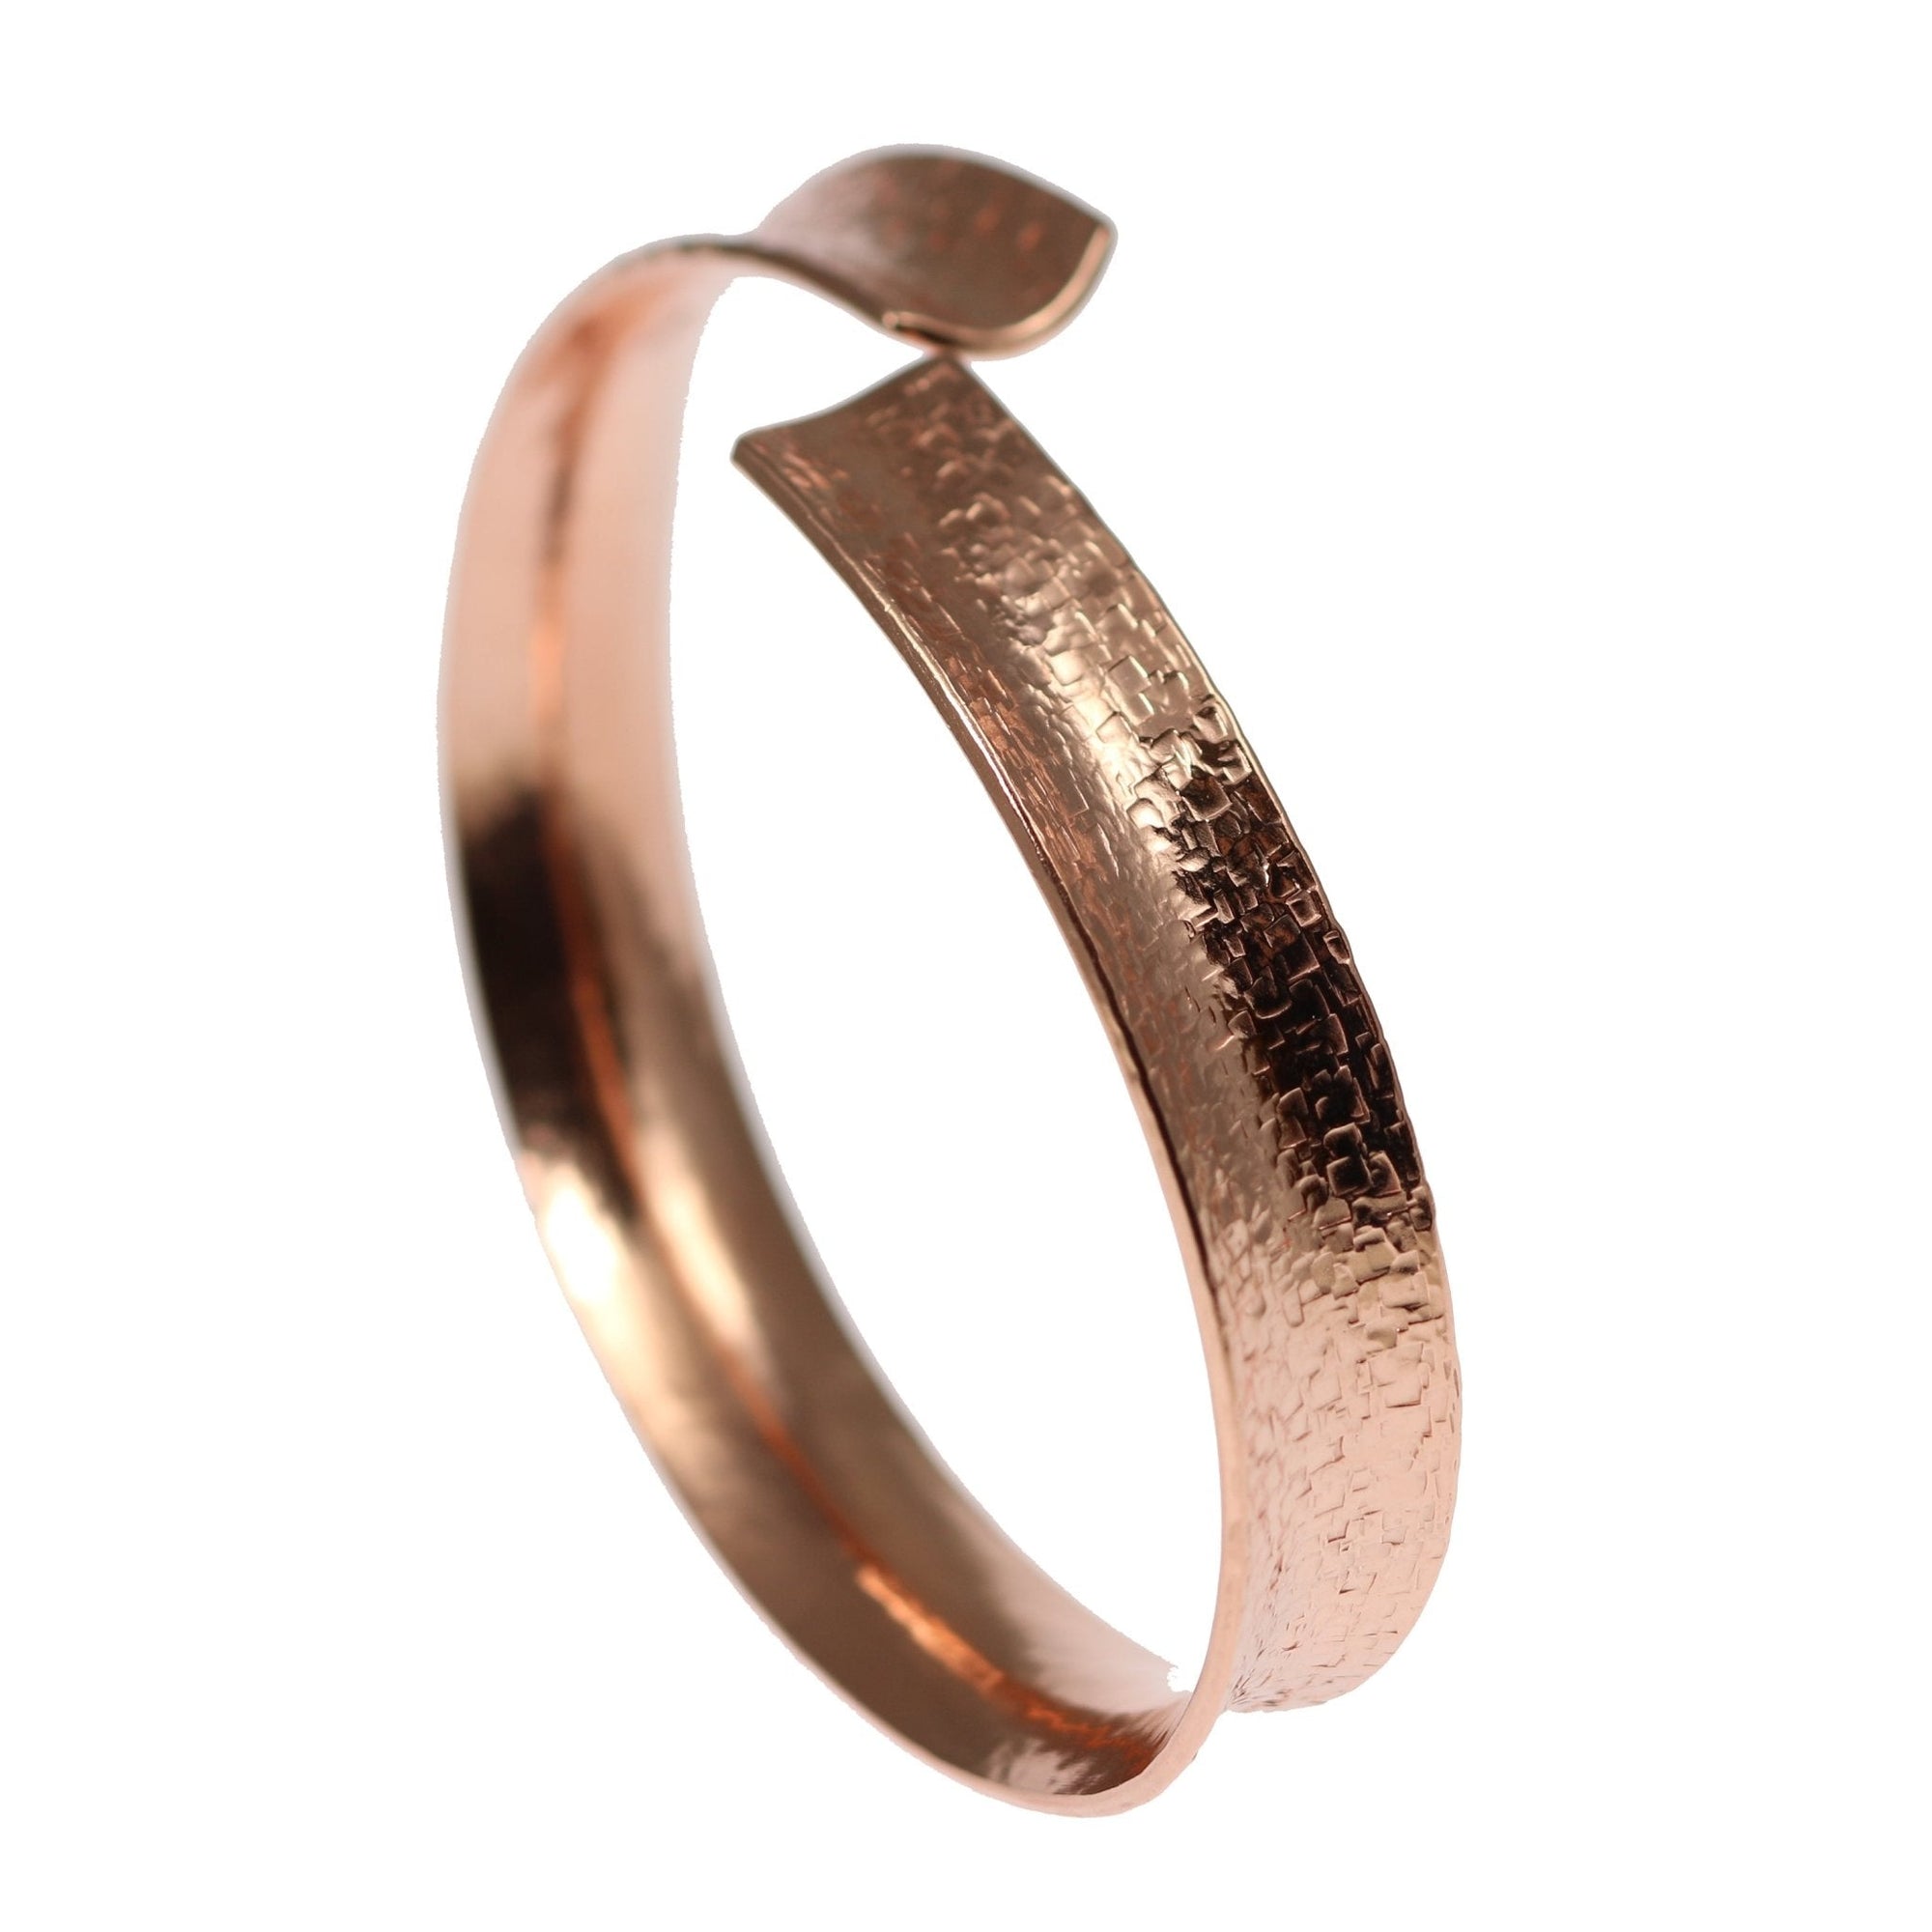 Detail View of Anticlastic Texturized Copper Bangle Bracelet